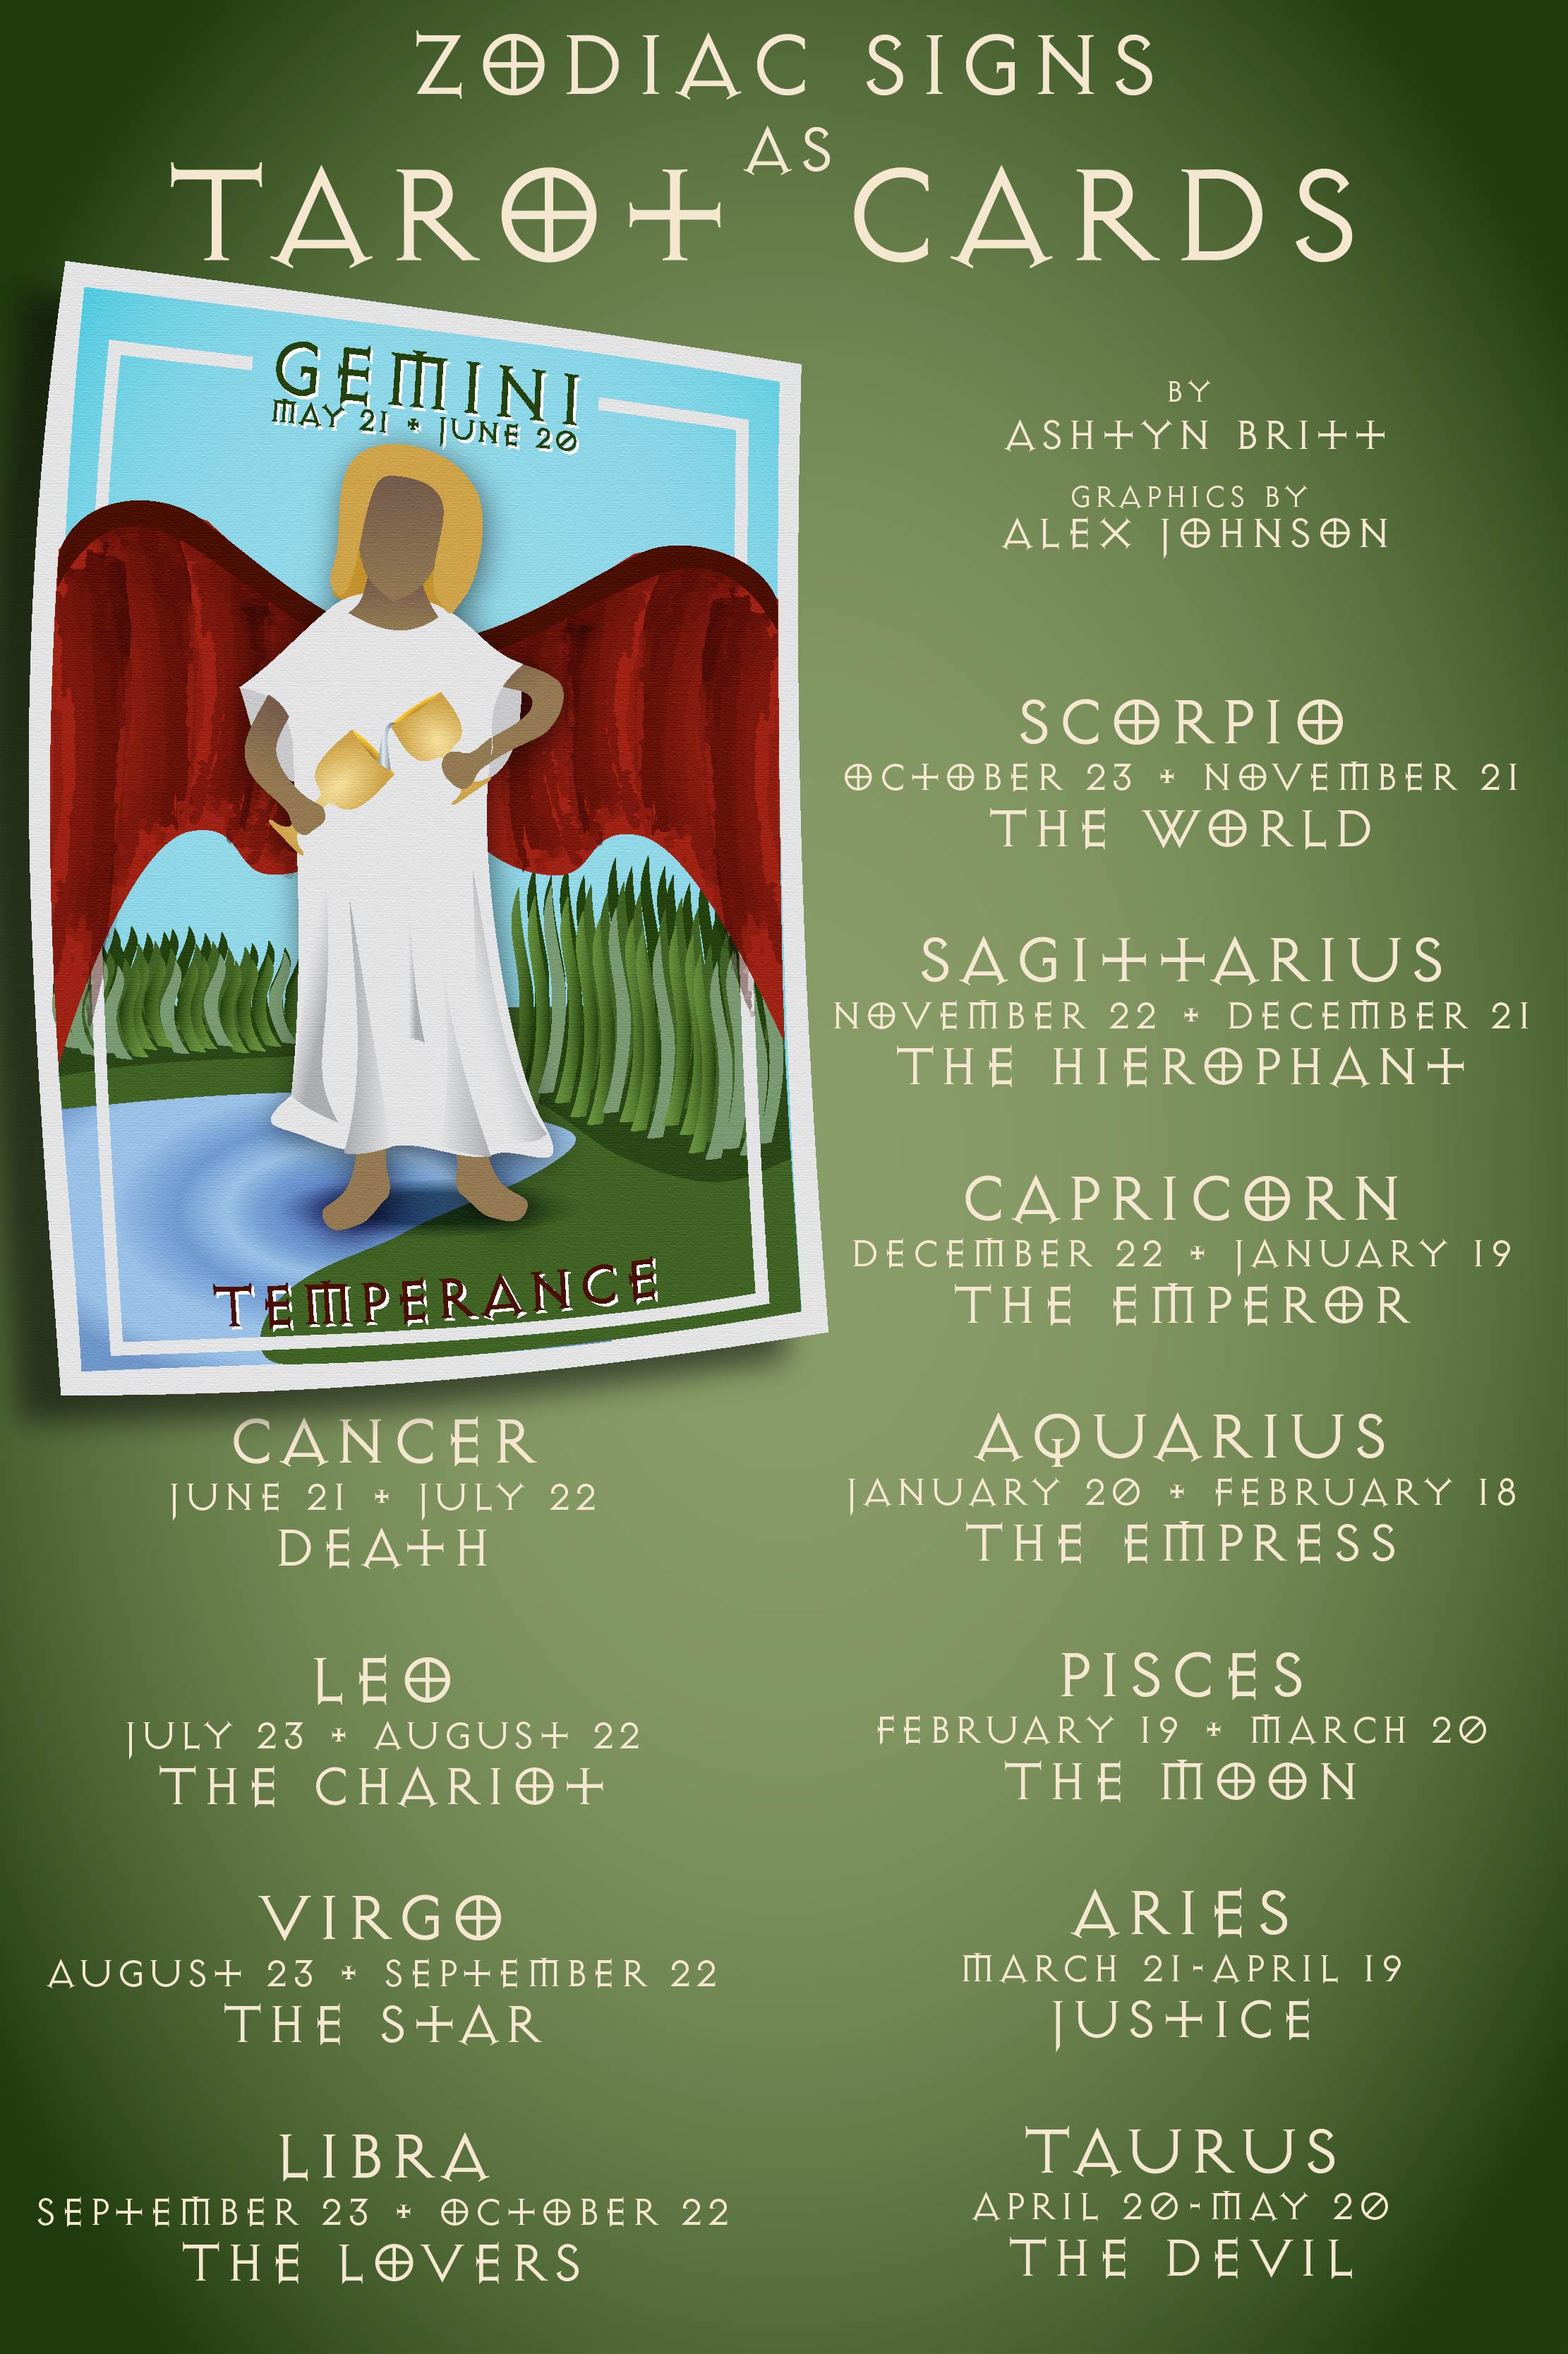 What tarot cards represent the zodiac signs?